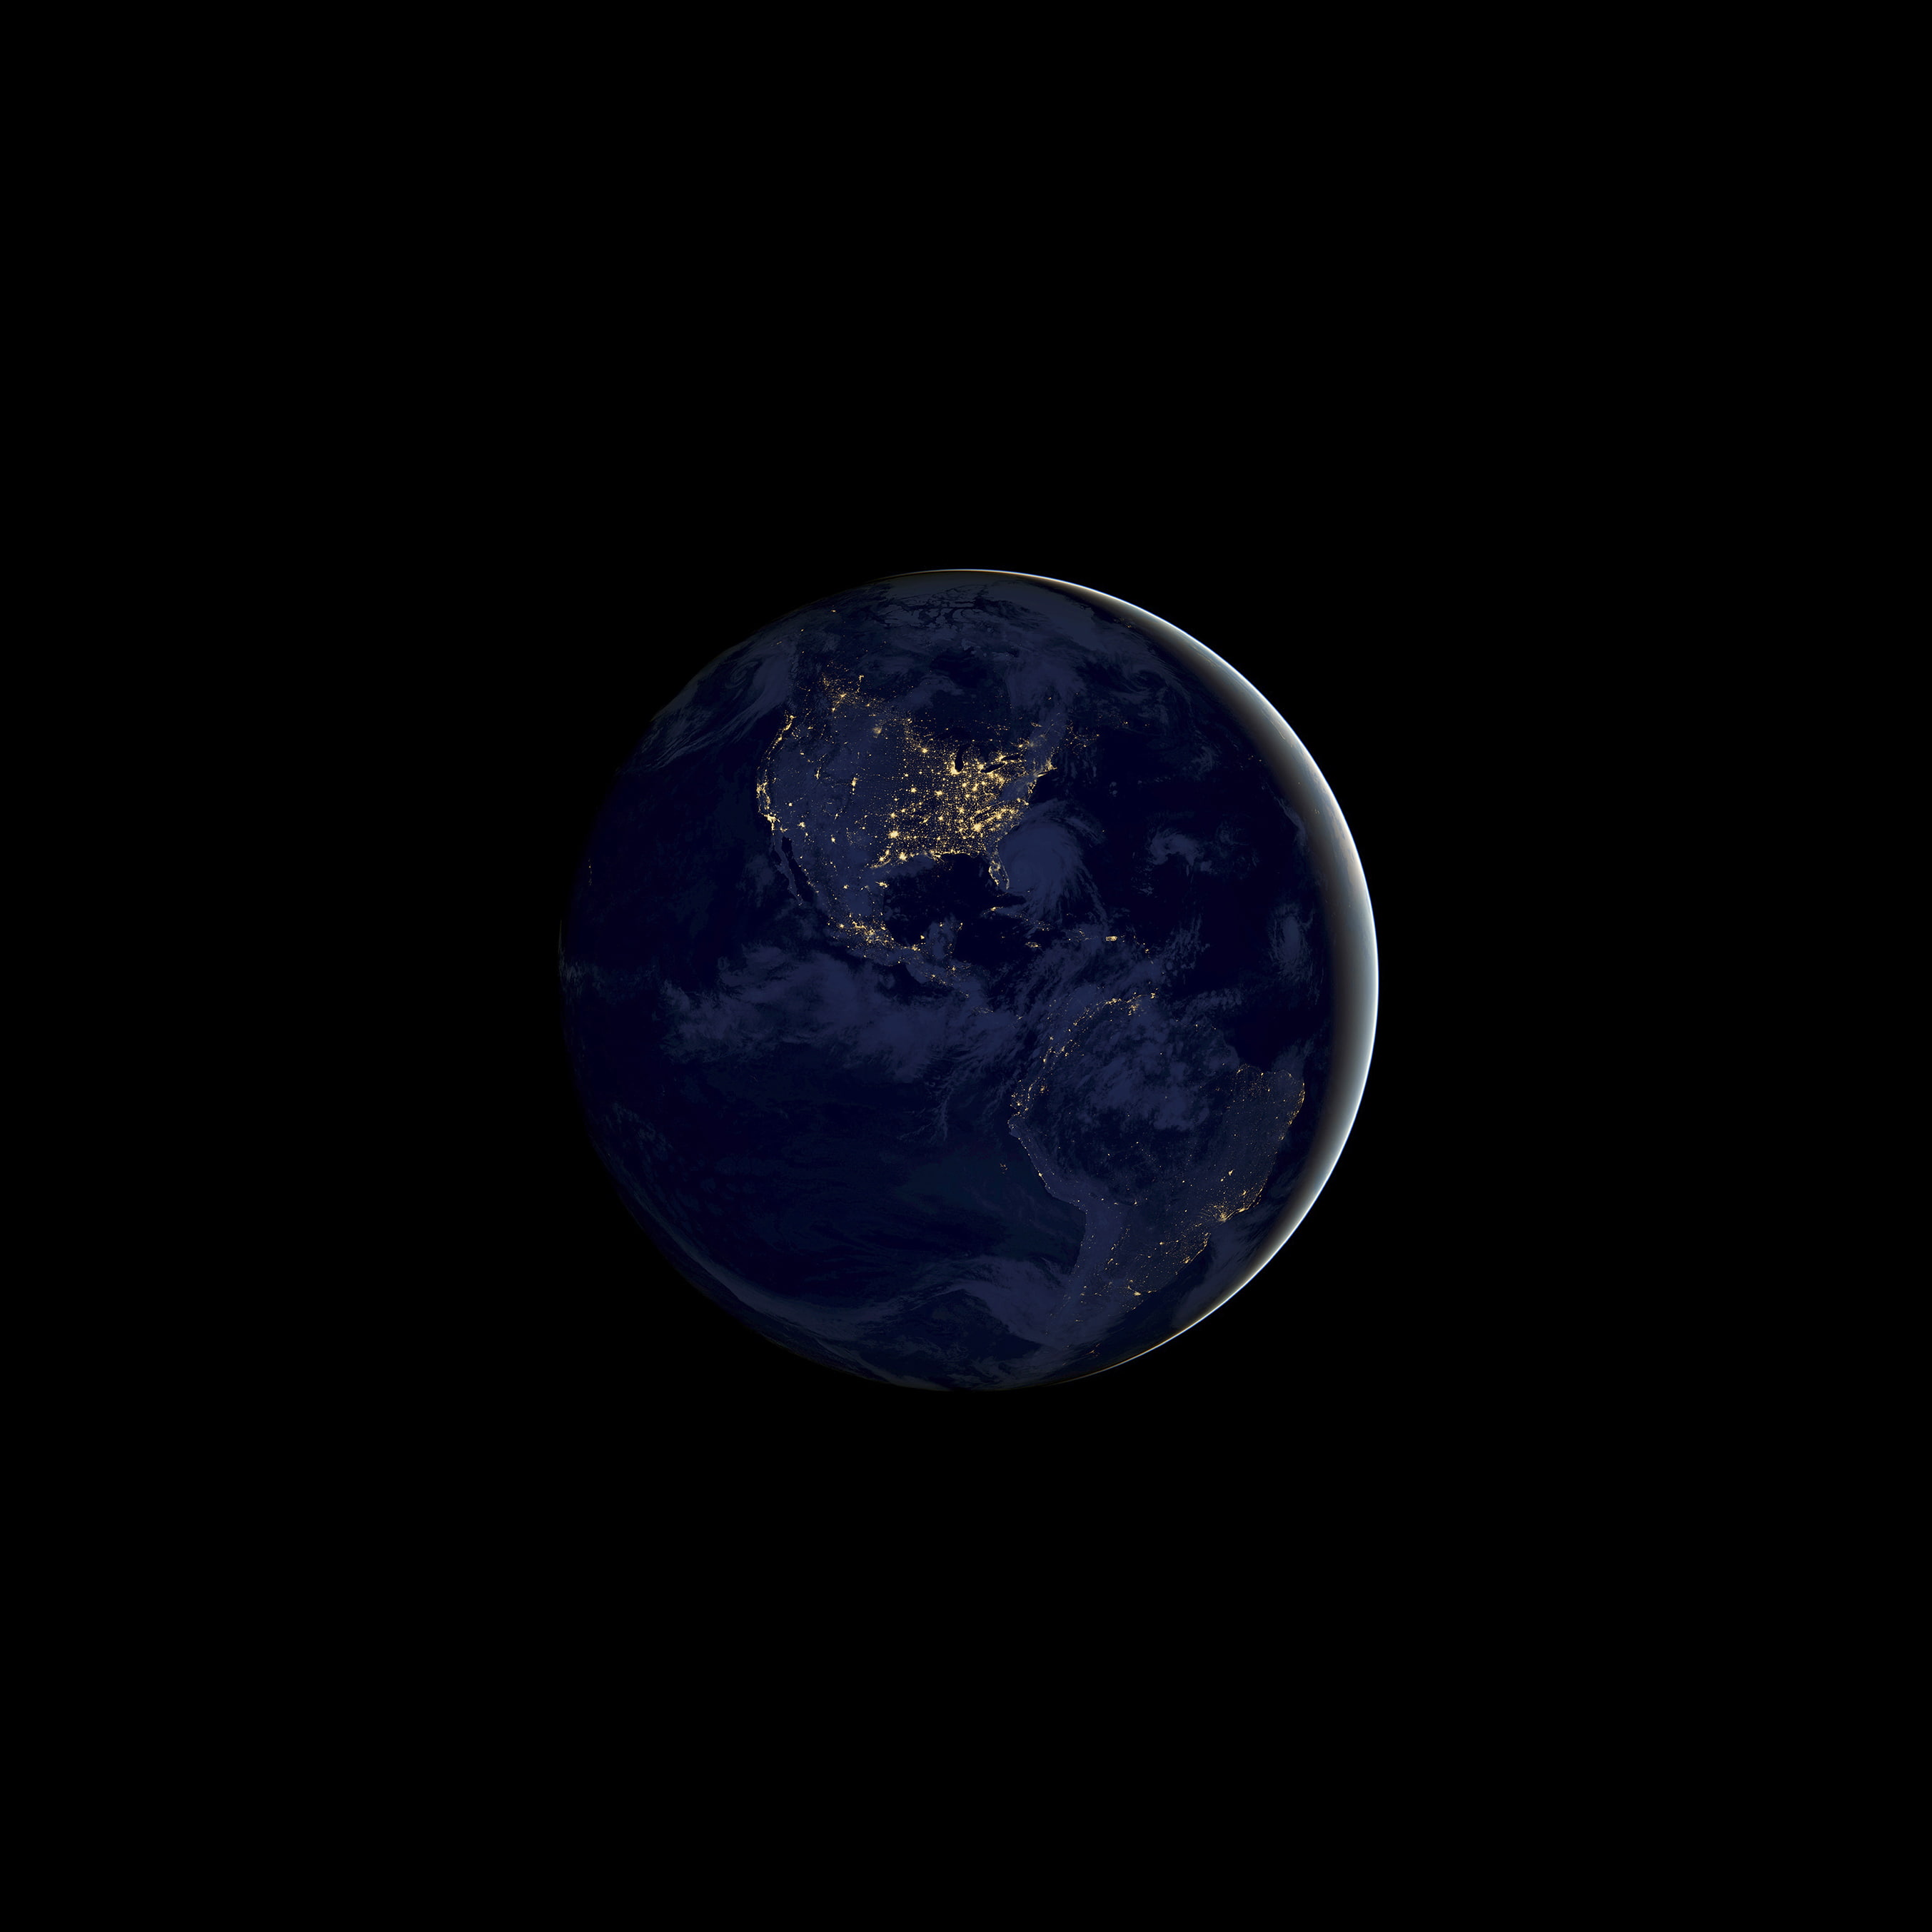 photograph of a planet, Earth, Night, iOS 11, iPhone X, iPhone 8